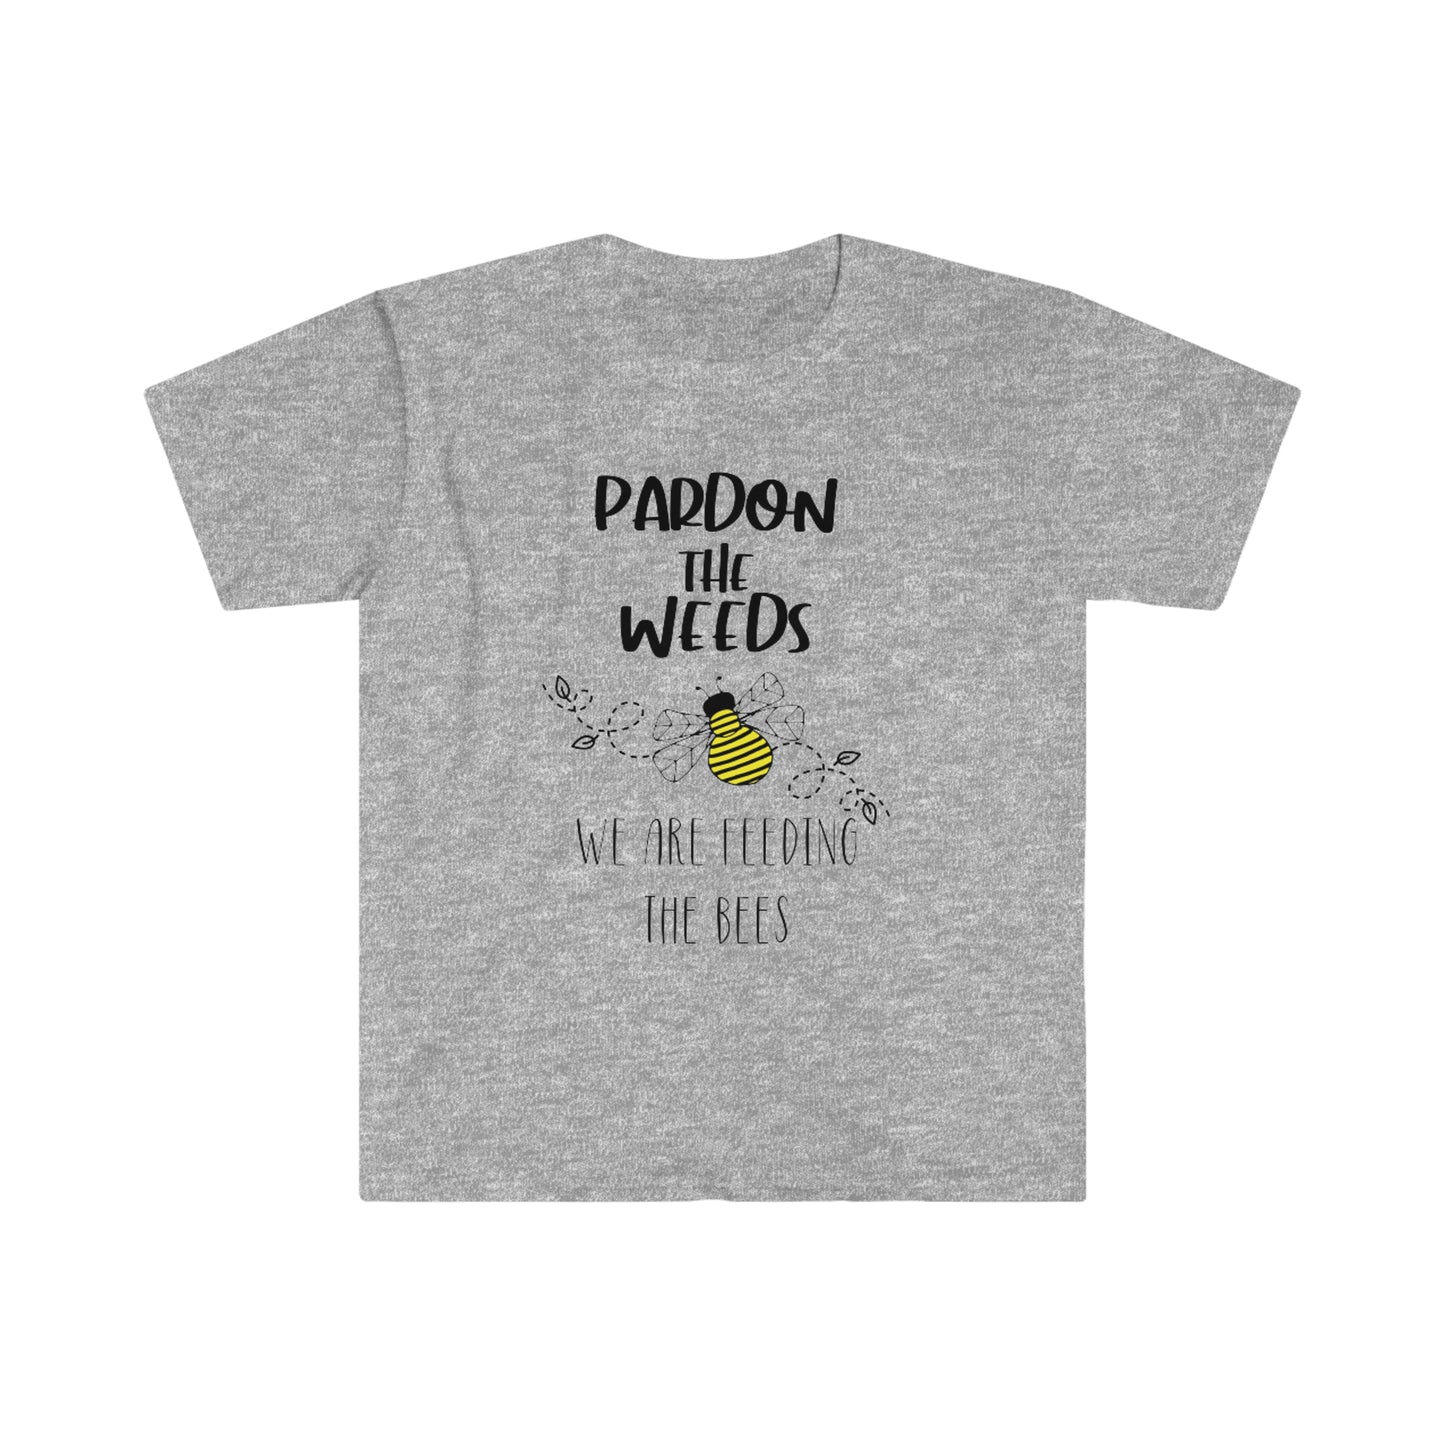 Pardon the weeds we are feeding the bees - Unisex Softstyle T-Shirt